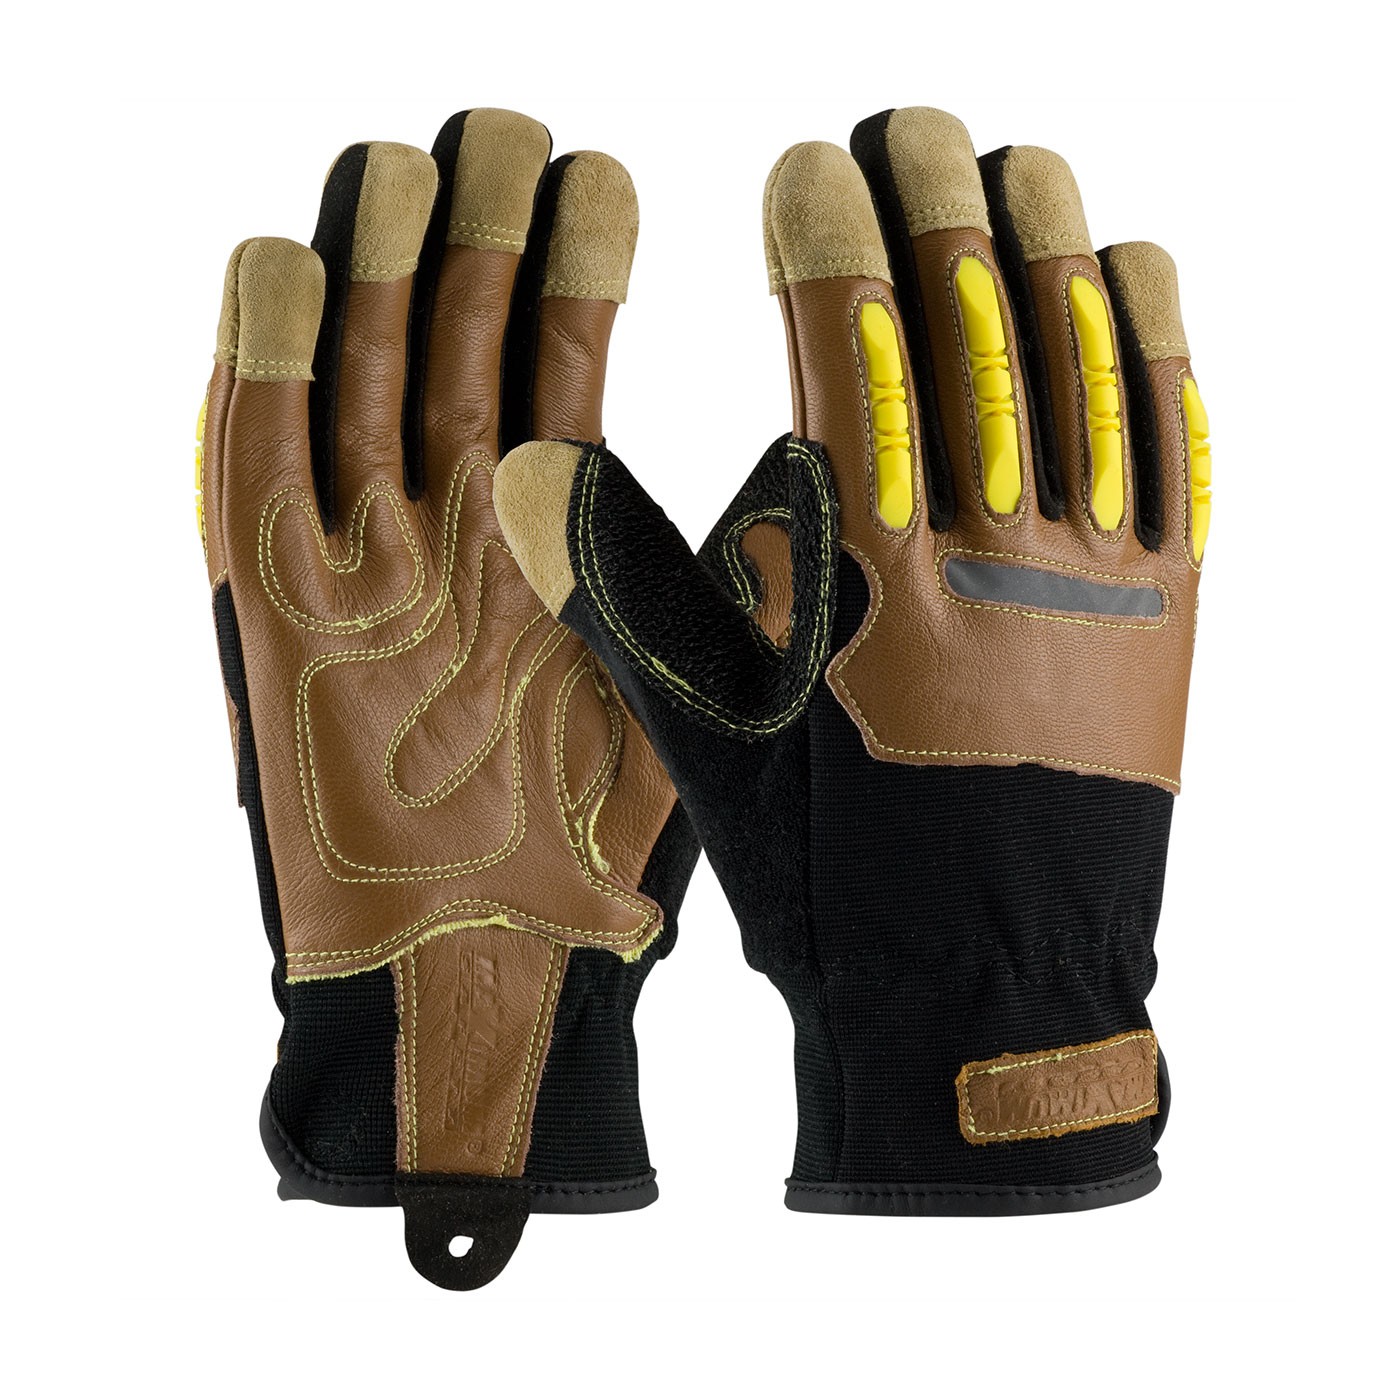 Maximum Safety® Reinforced Goatskin Leather Palm Glove with Leather Back, Kevlar® Lining and TPR Molded Knuckle Guards  (#120-4100)